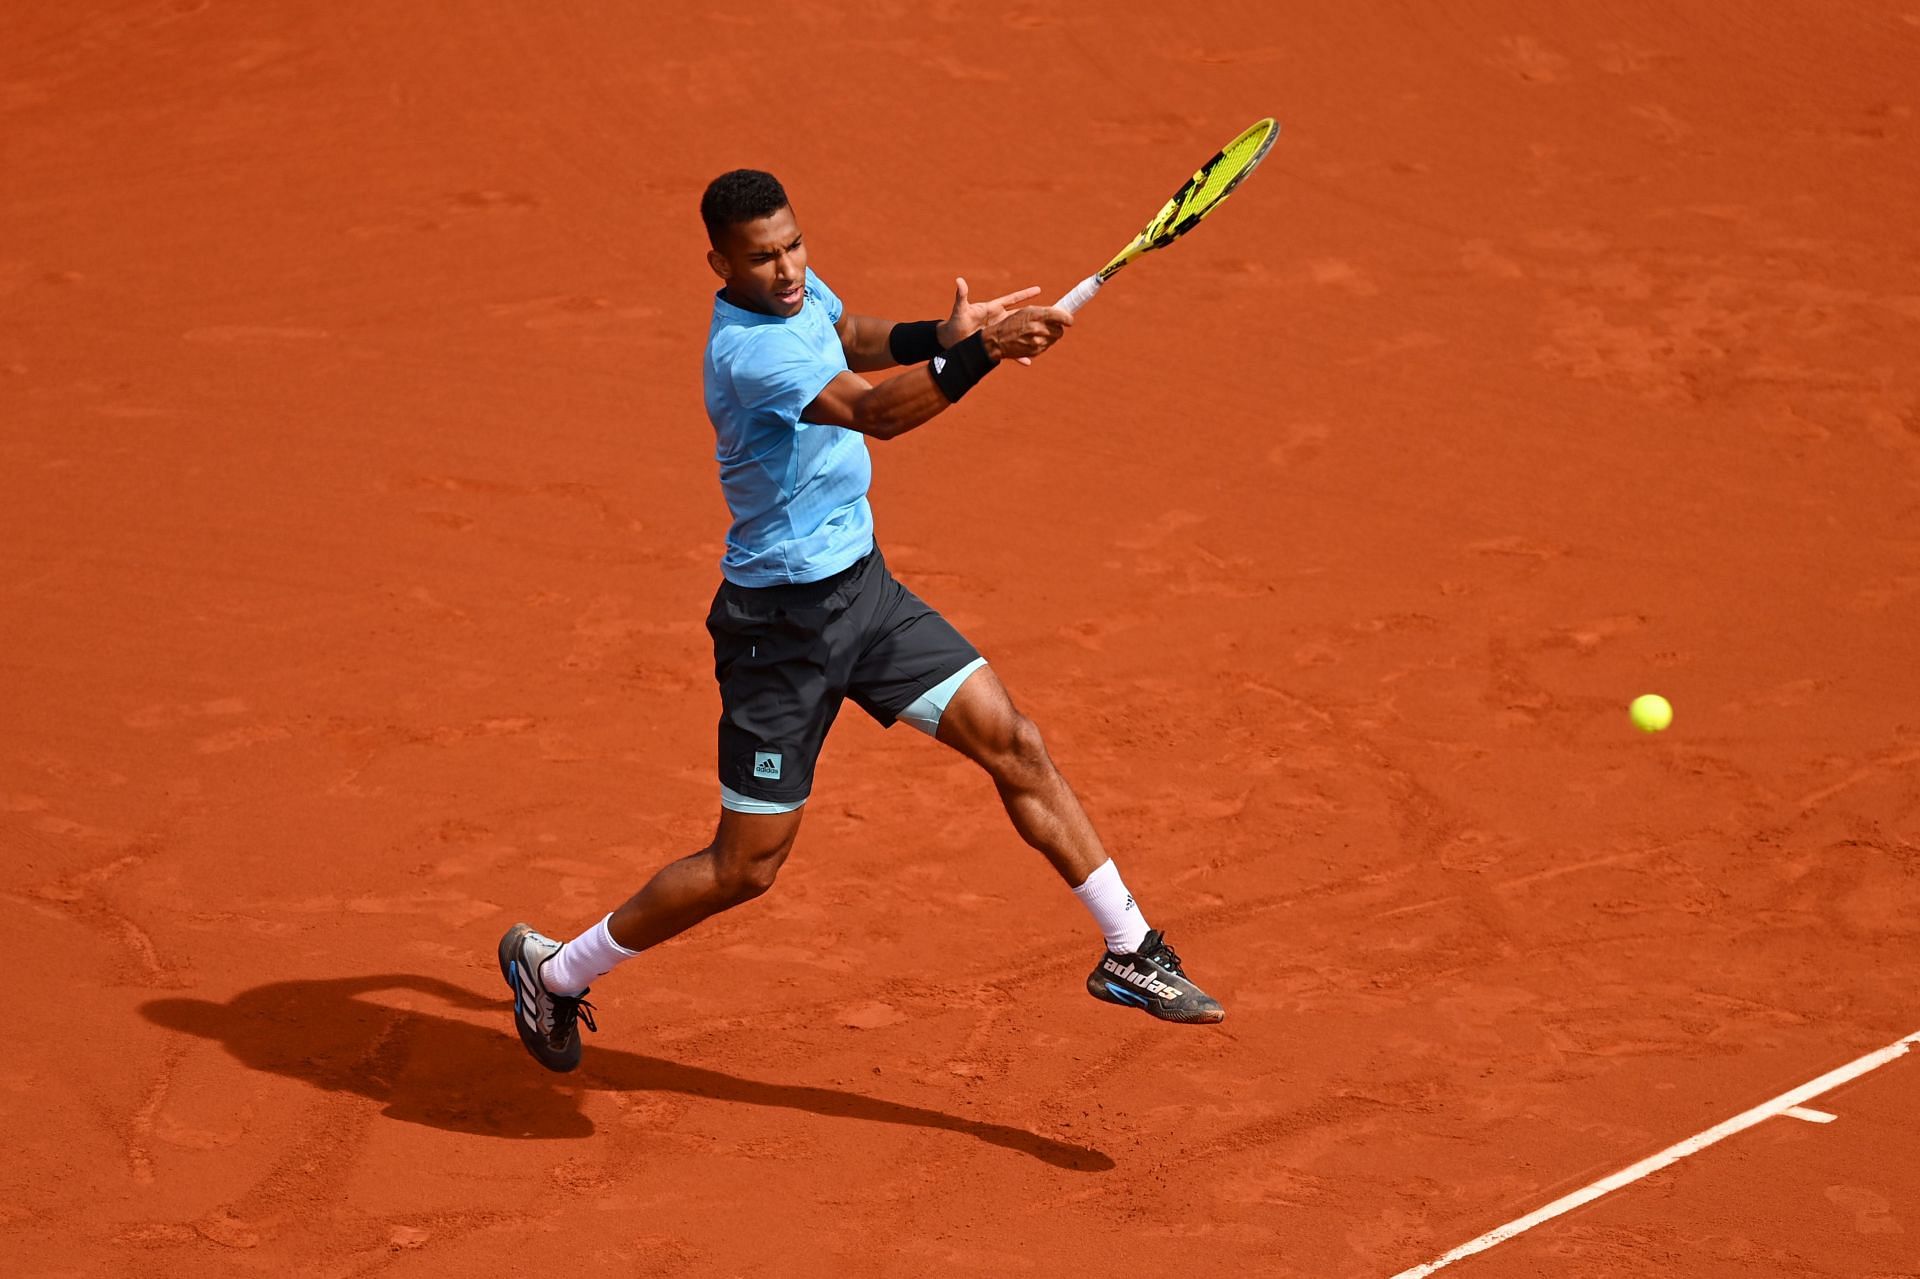 Felix Auger-Aliassime will look to reach the quarterfinals of the Estoril Open